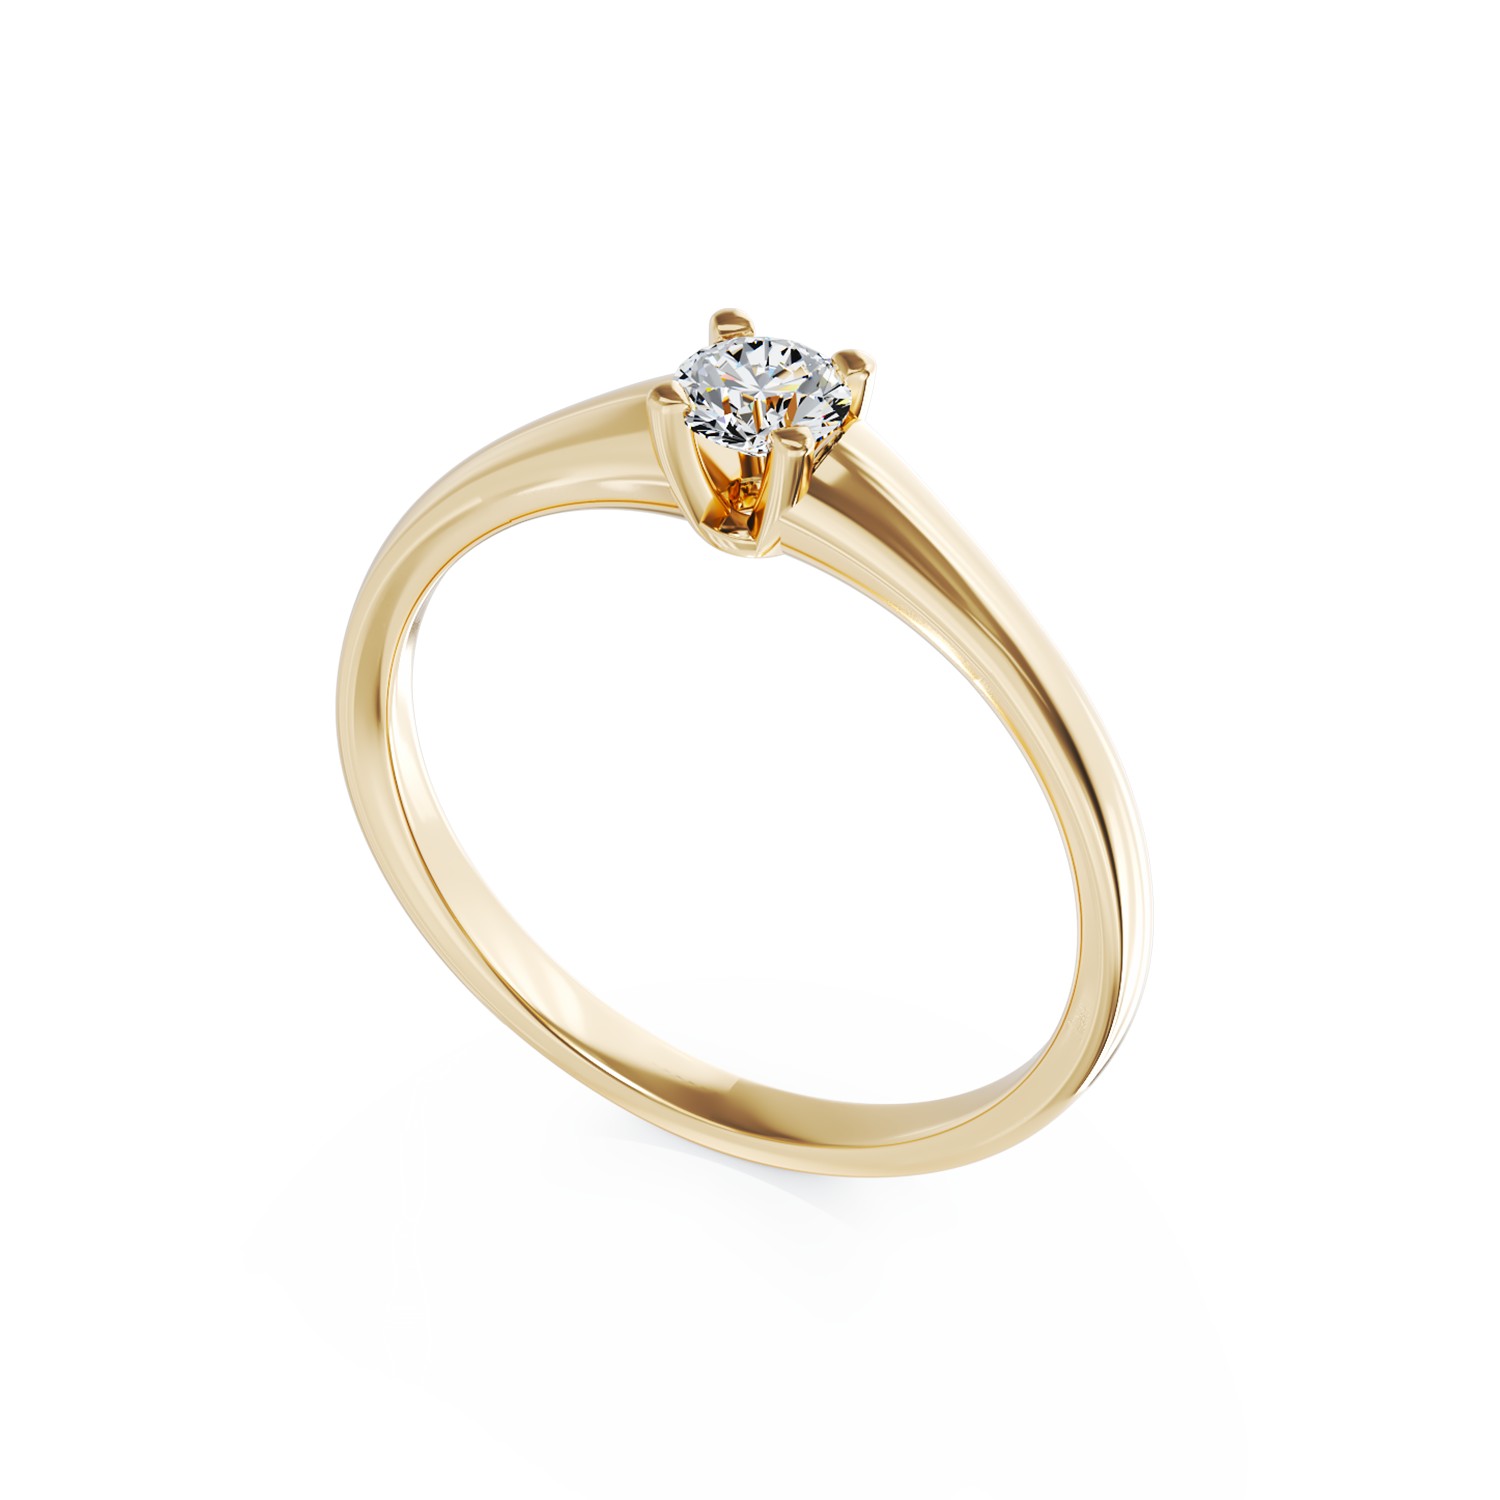 Yellow gold engagement ring with 0.1ct solitaire diamond